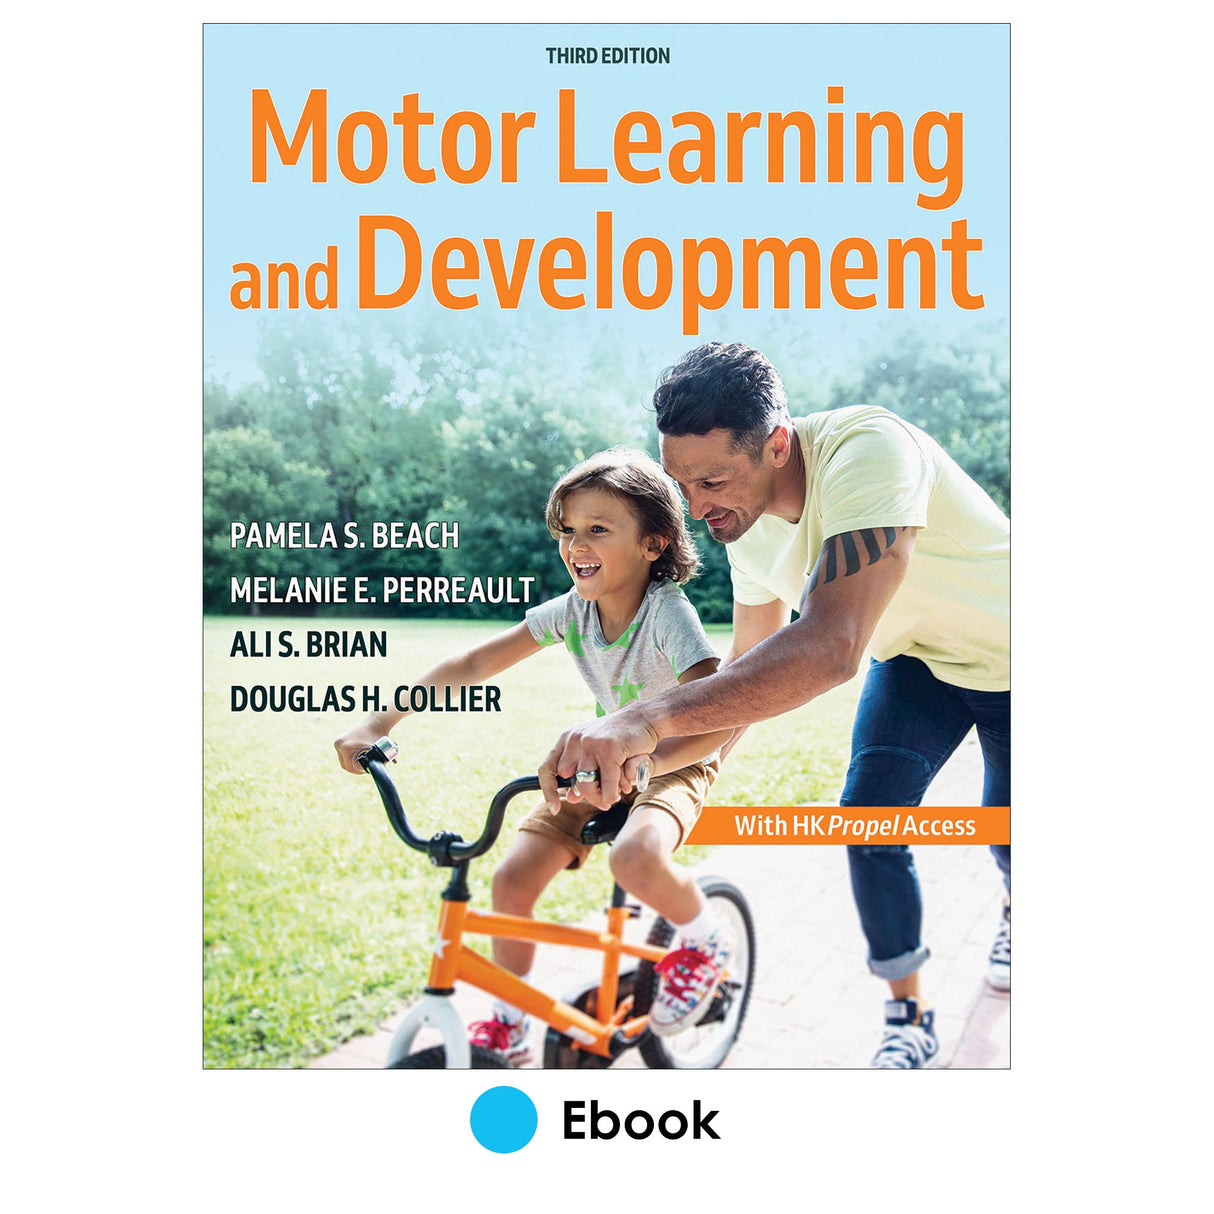 Motor Learning and Development 3rd Edition Ebook With HKPropel Access